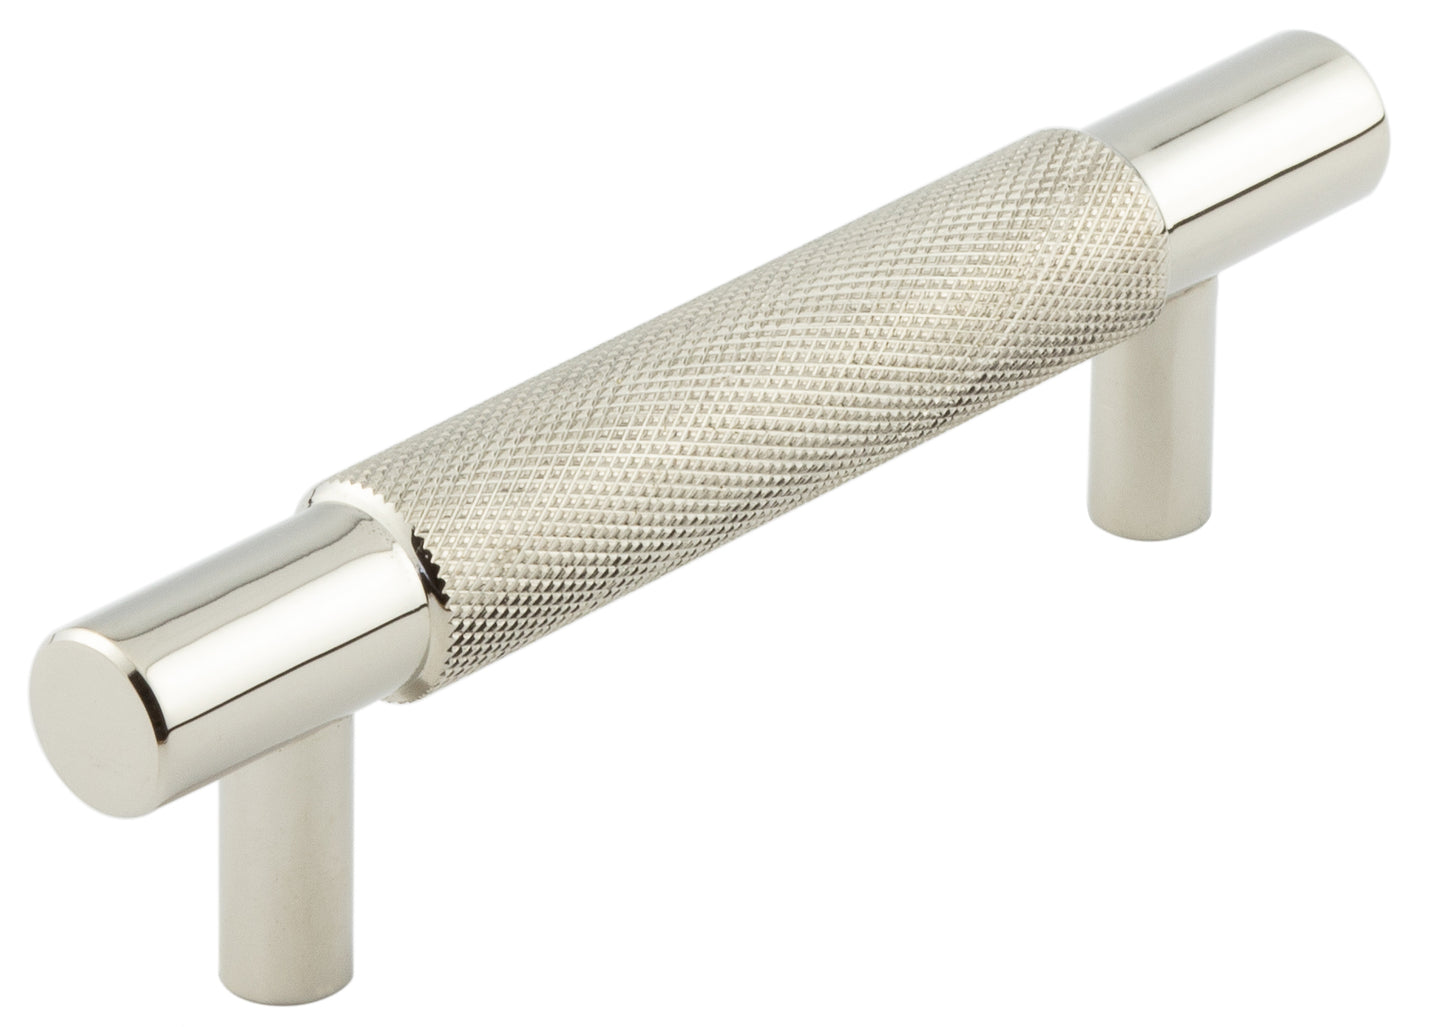 Hoxton Hoxton Taplow Cabinet Handles 96mm Ctrs